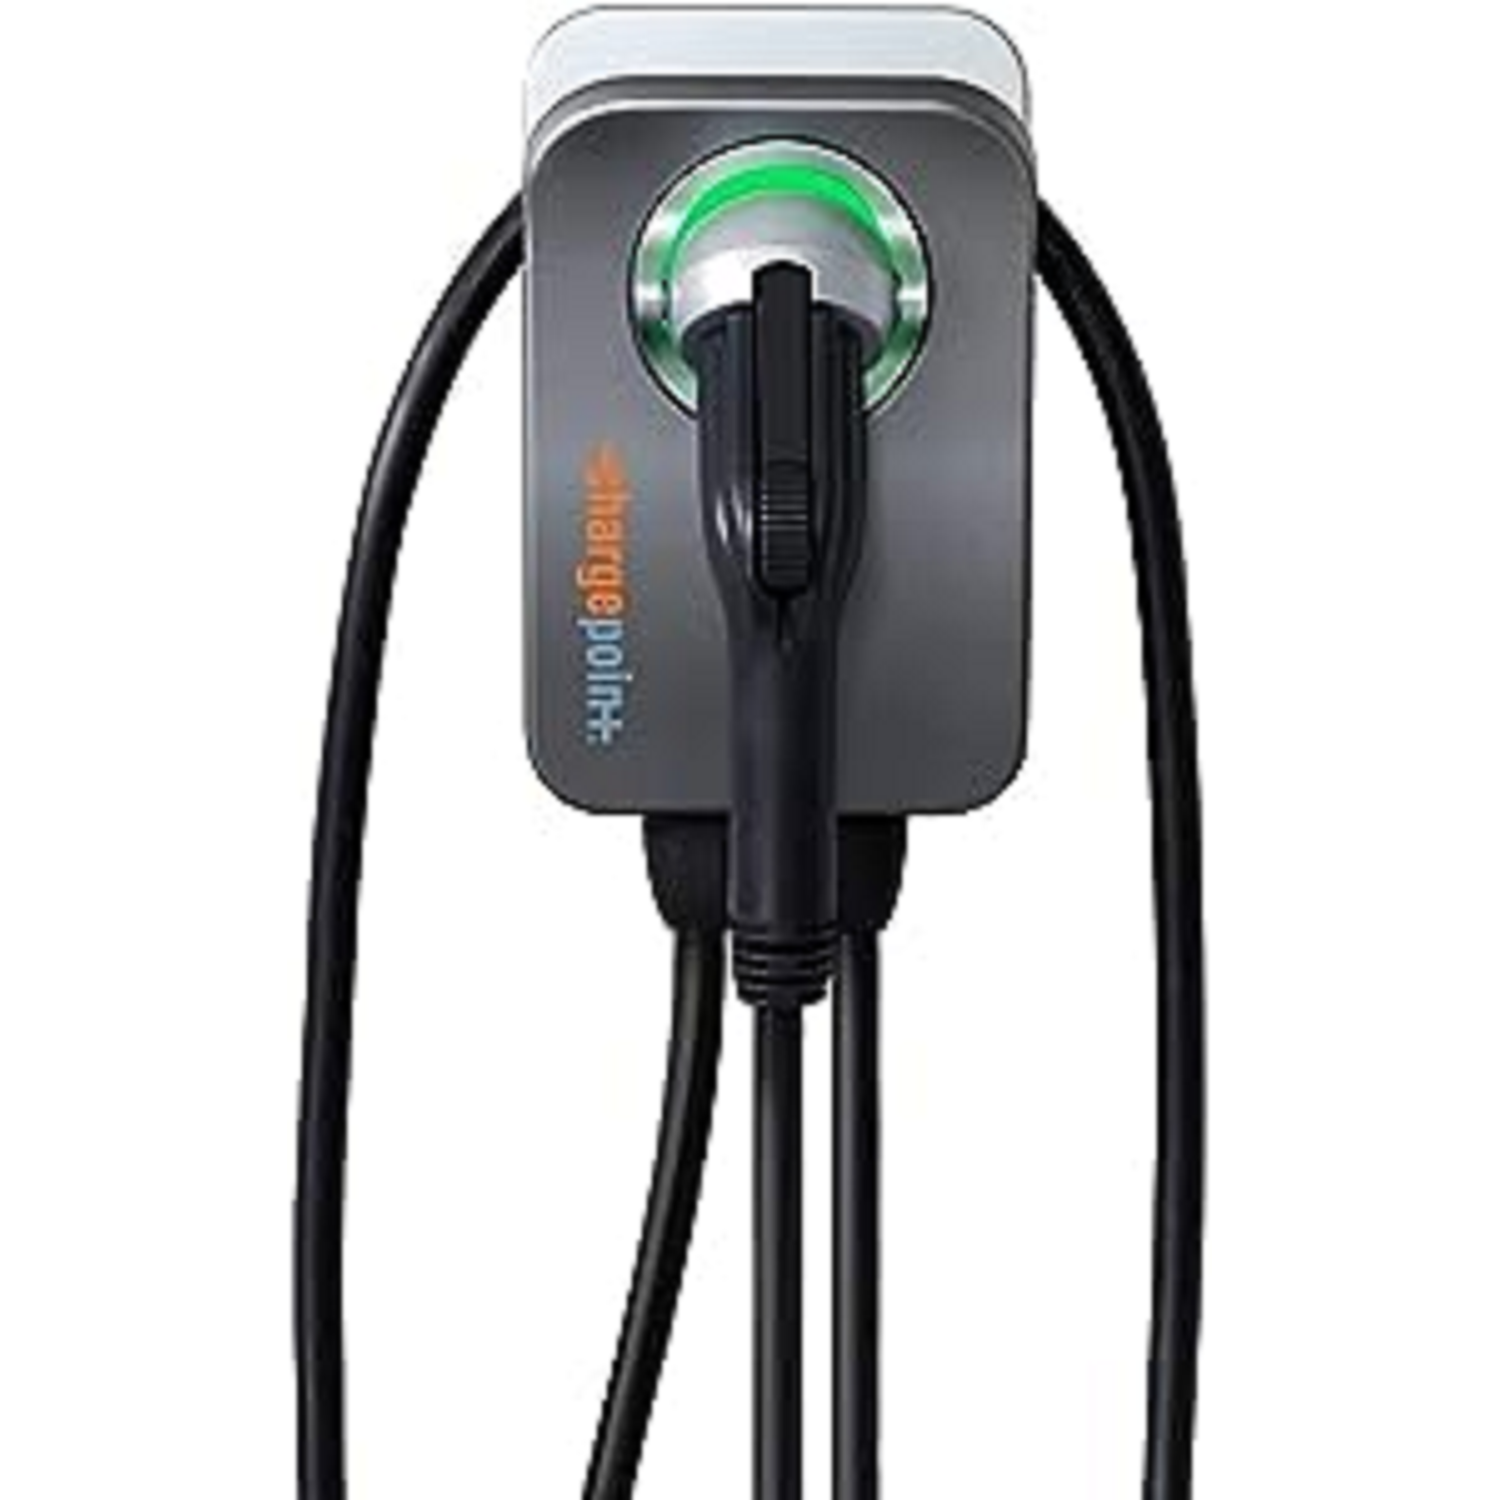 ChargePoint Home Flex Level 2 WiFi Enabled 240 Volt NEMA 6-50 Plug Electric Vehicle EV Charger for Plug in or Hardwired Indoor Outdoor Setup w/Cable